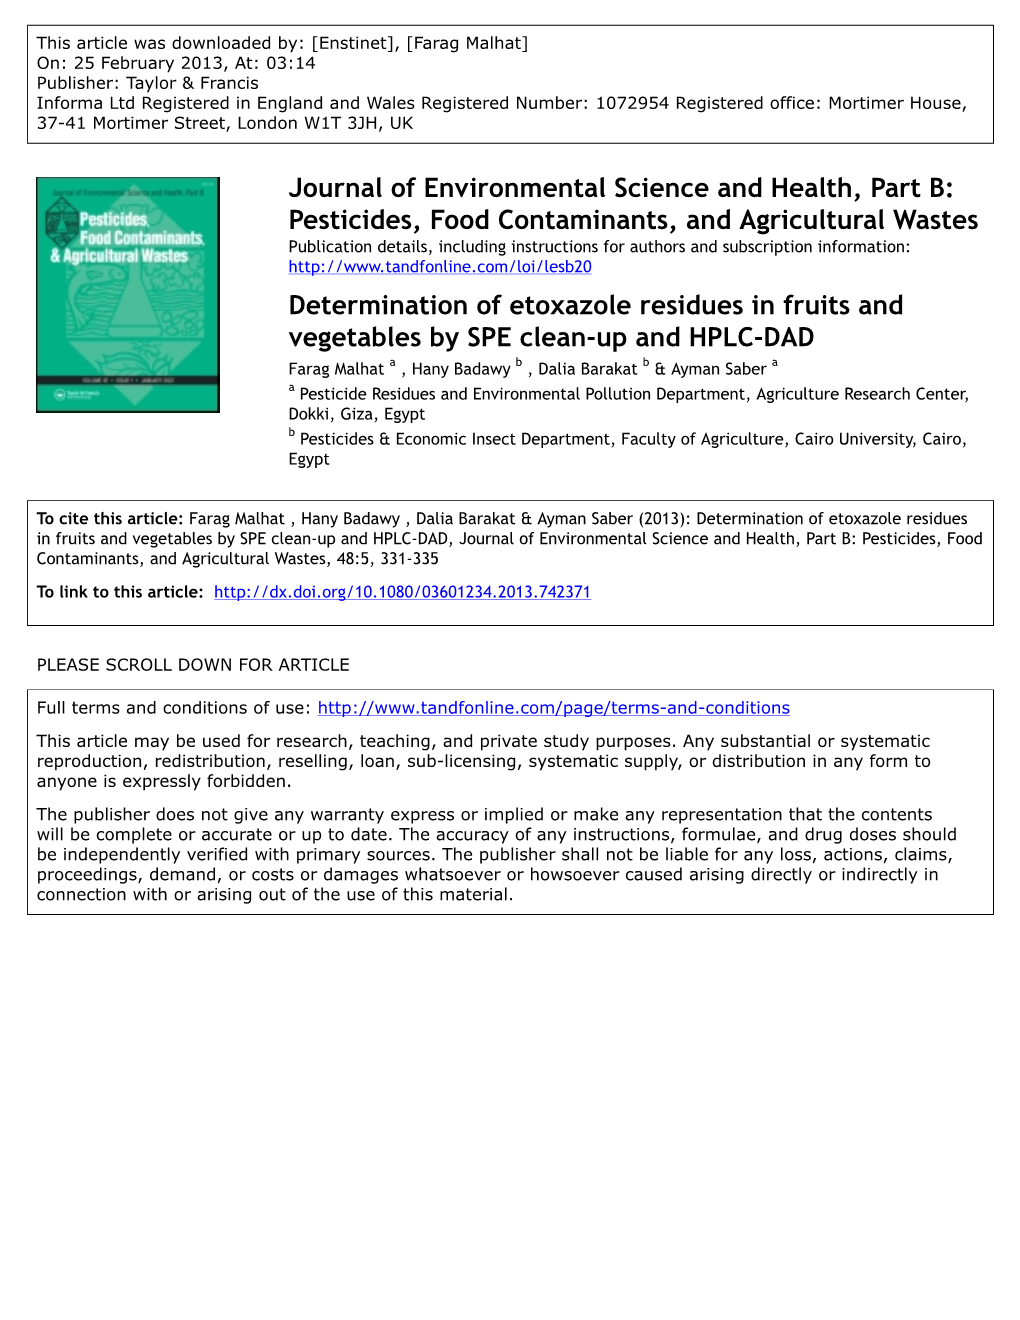 Determination of Etoxazole Residues in Fruits and Vegetables by SPE Clean